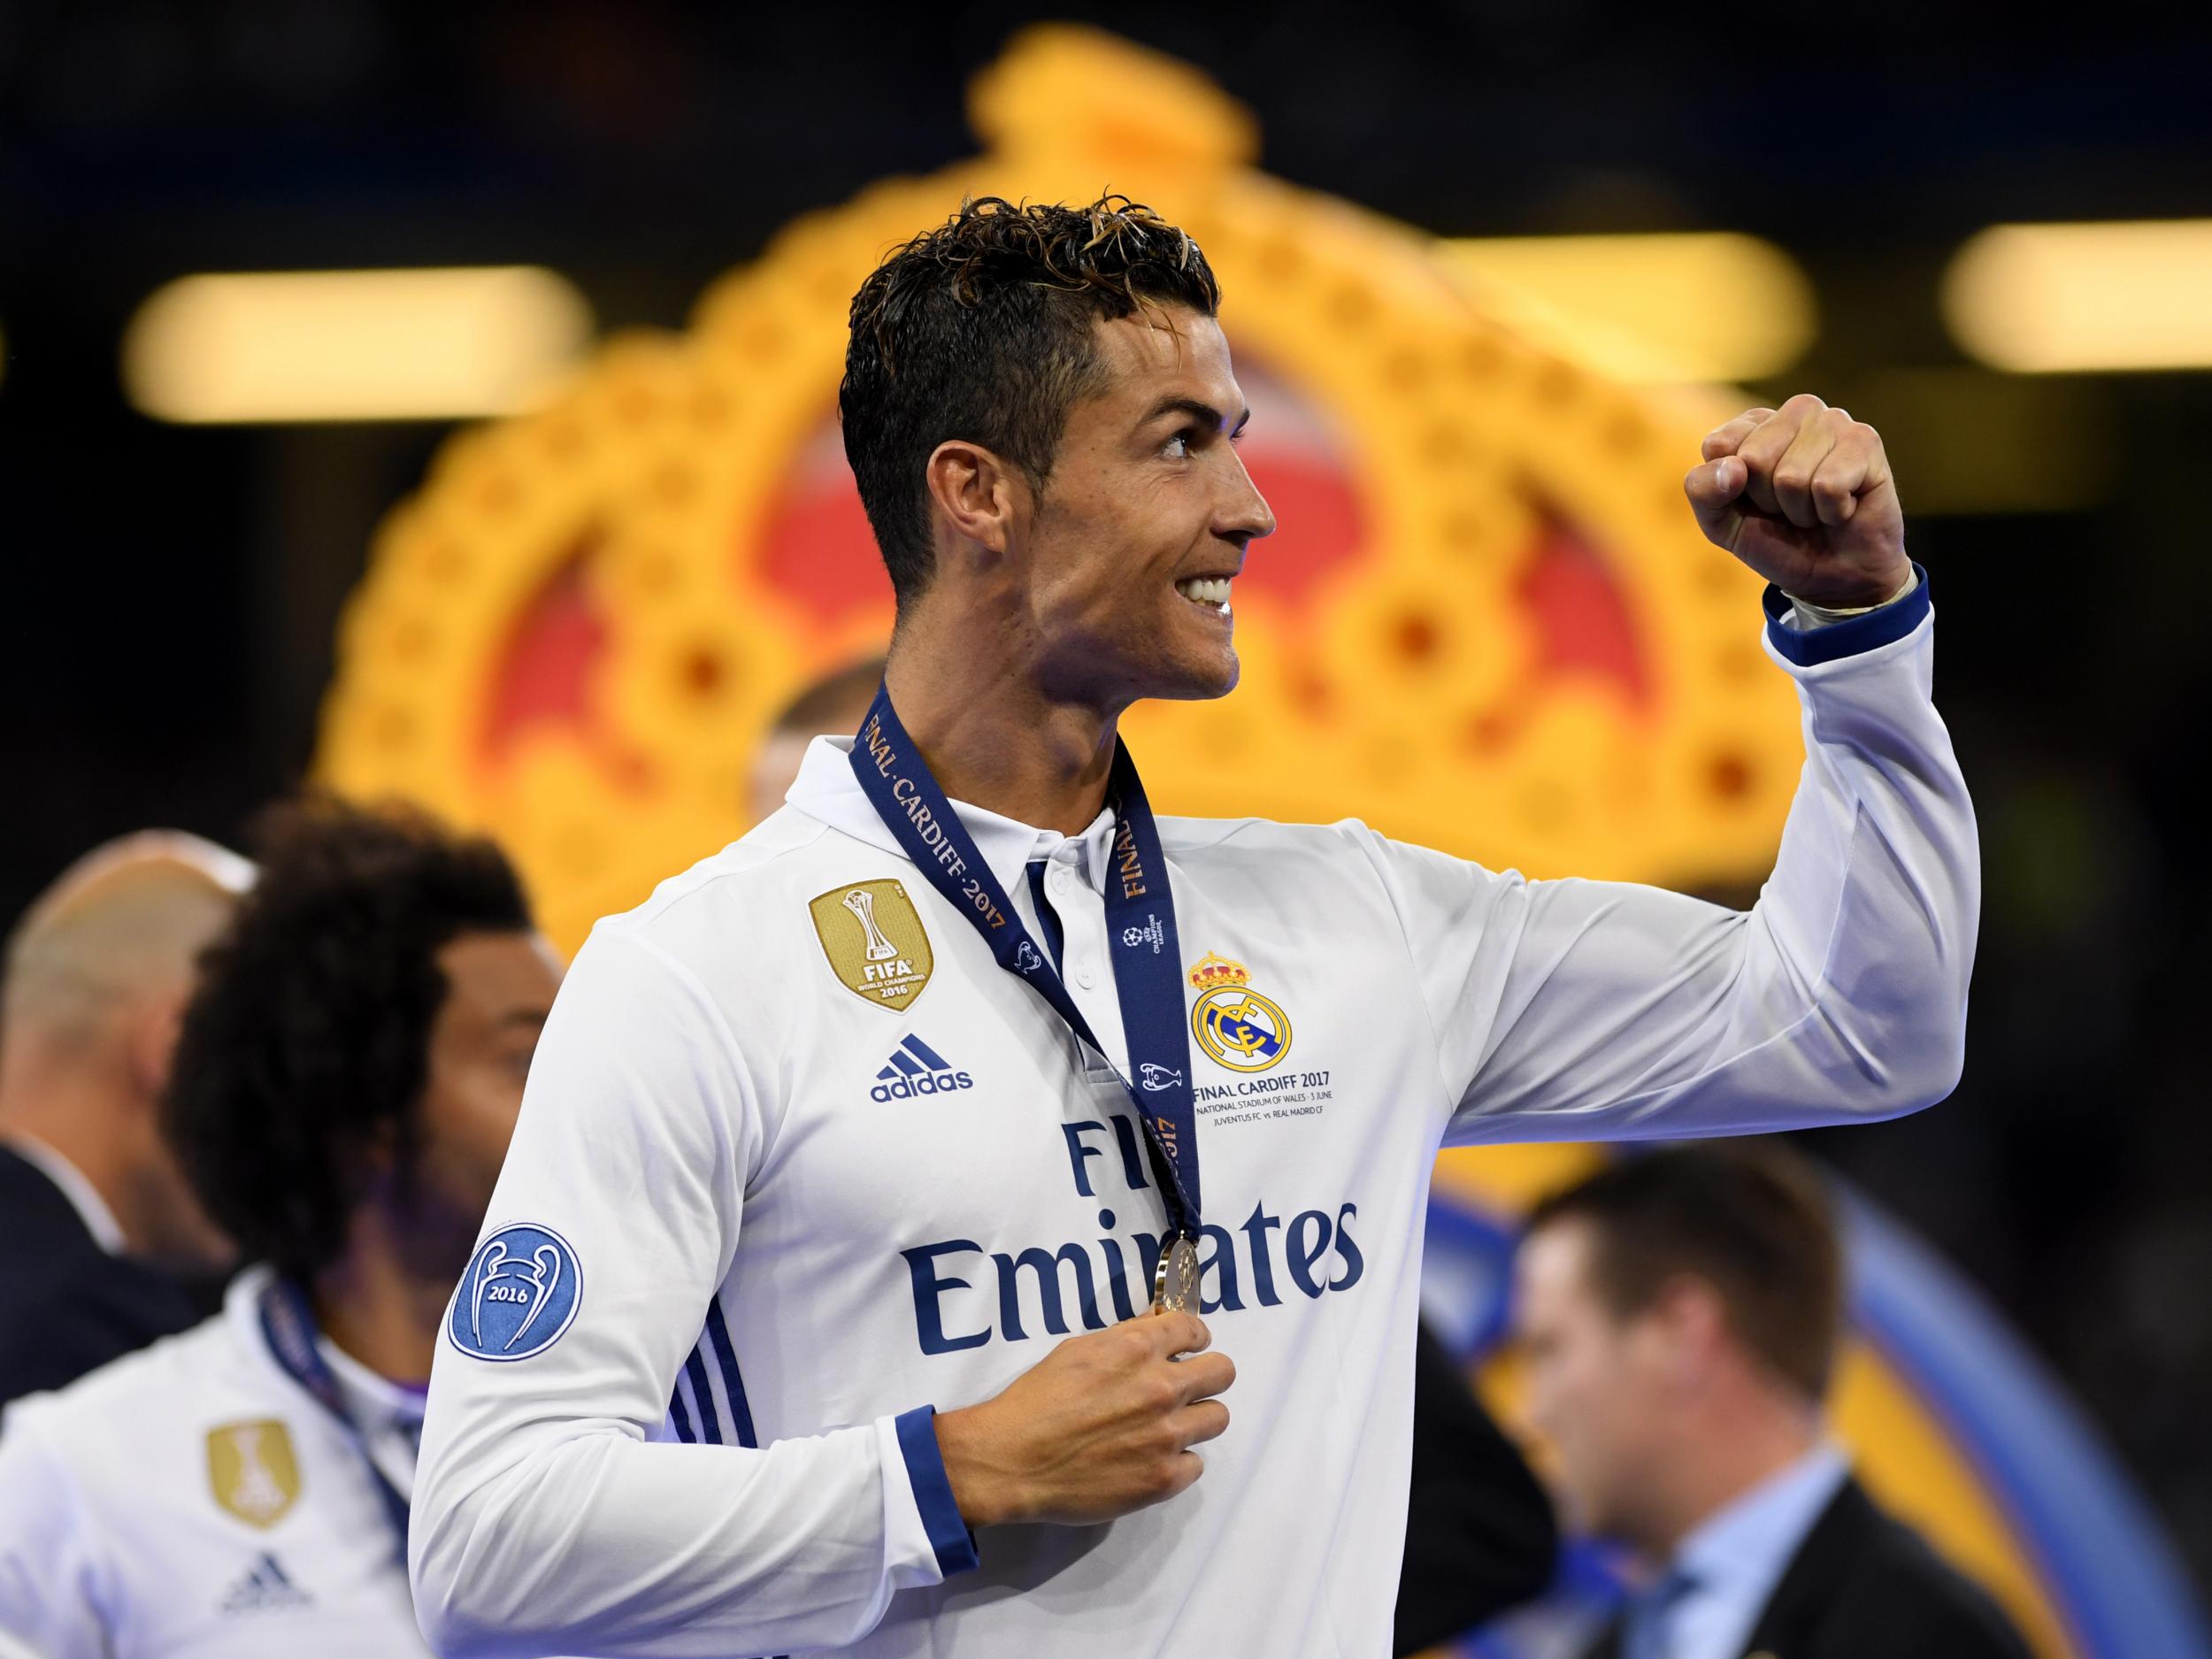 Ronaldo delivered yet another man of the match worthy display